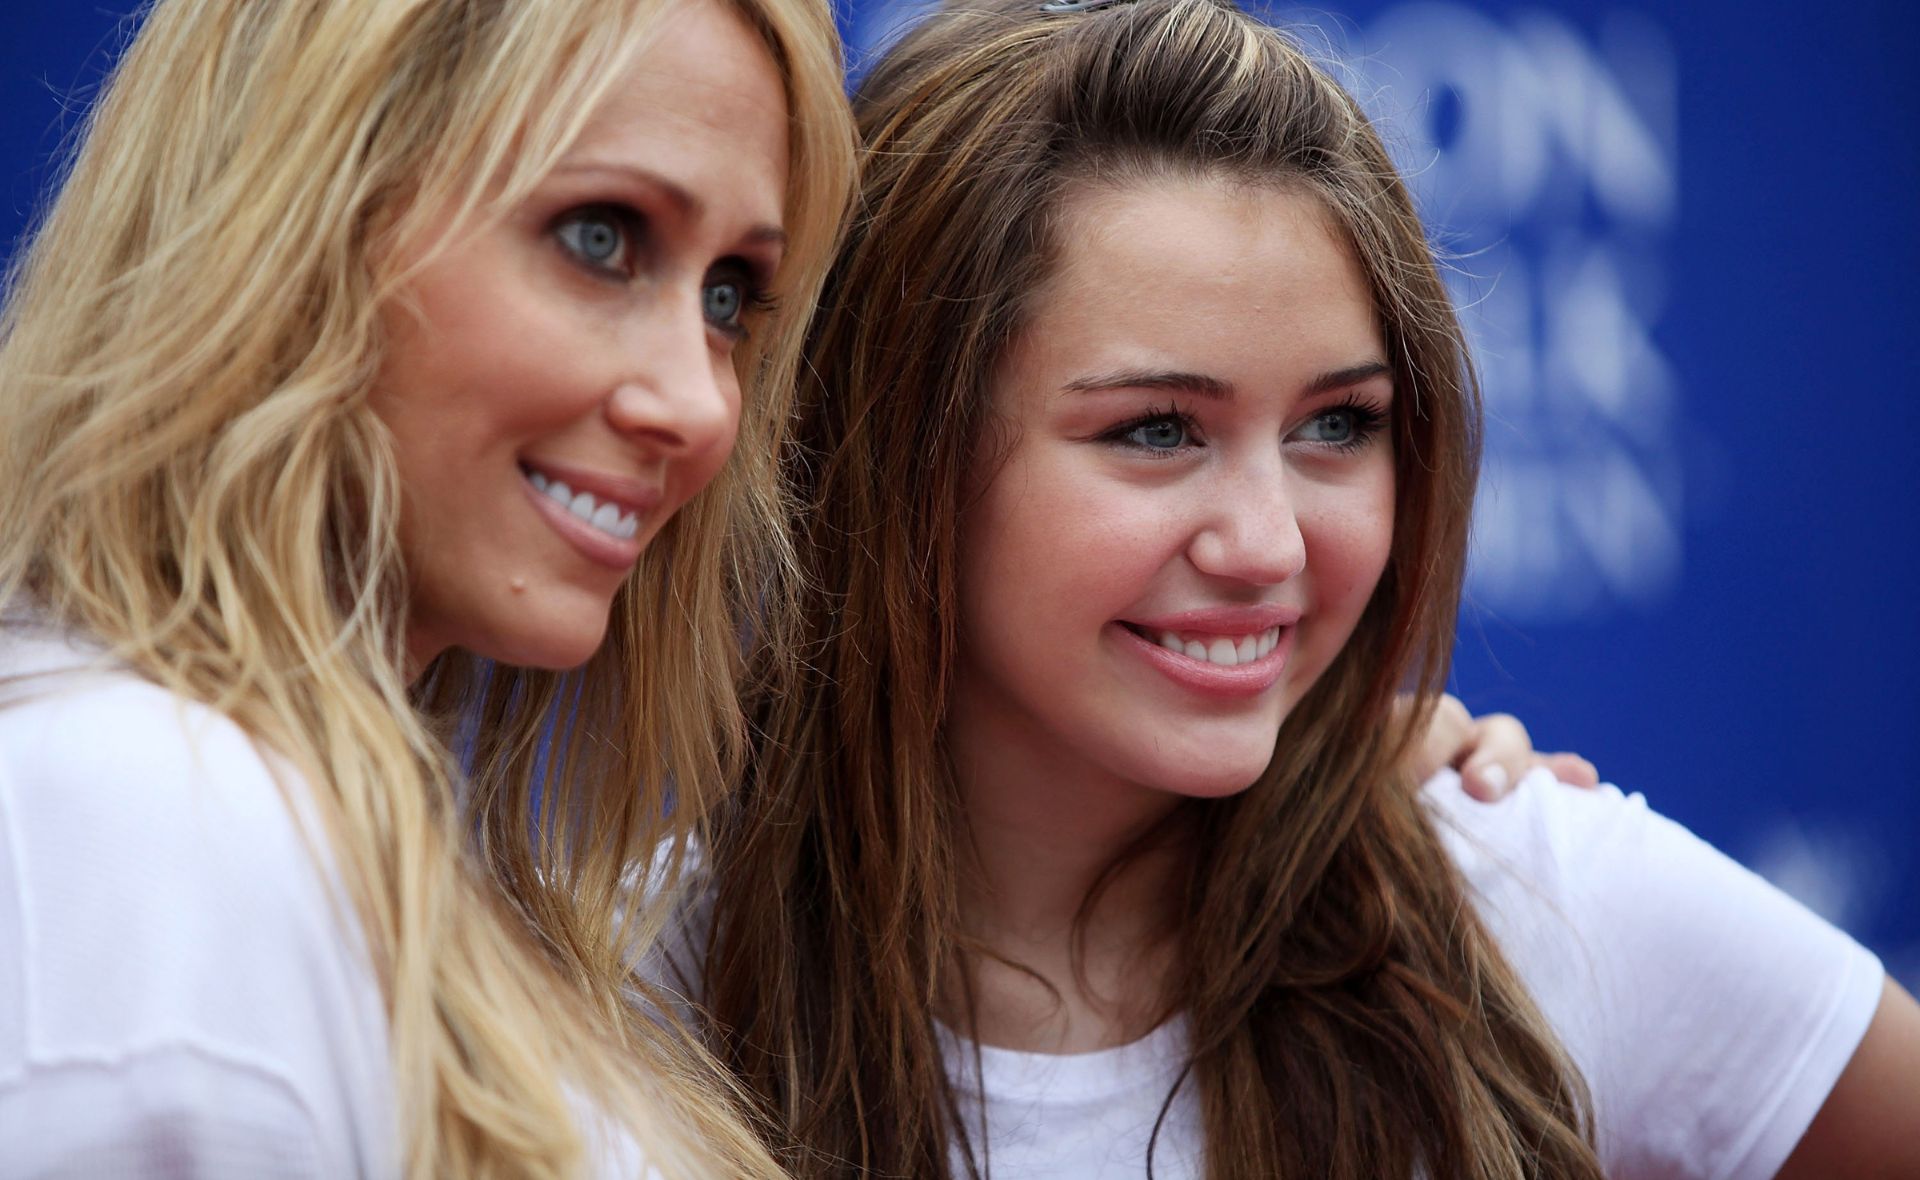 Miley Cyrus’s family is feuding after siblings avoid their Mum’s wedding